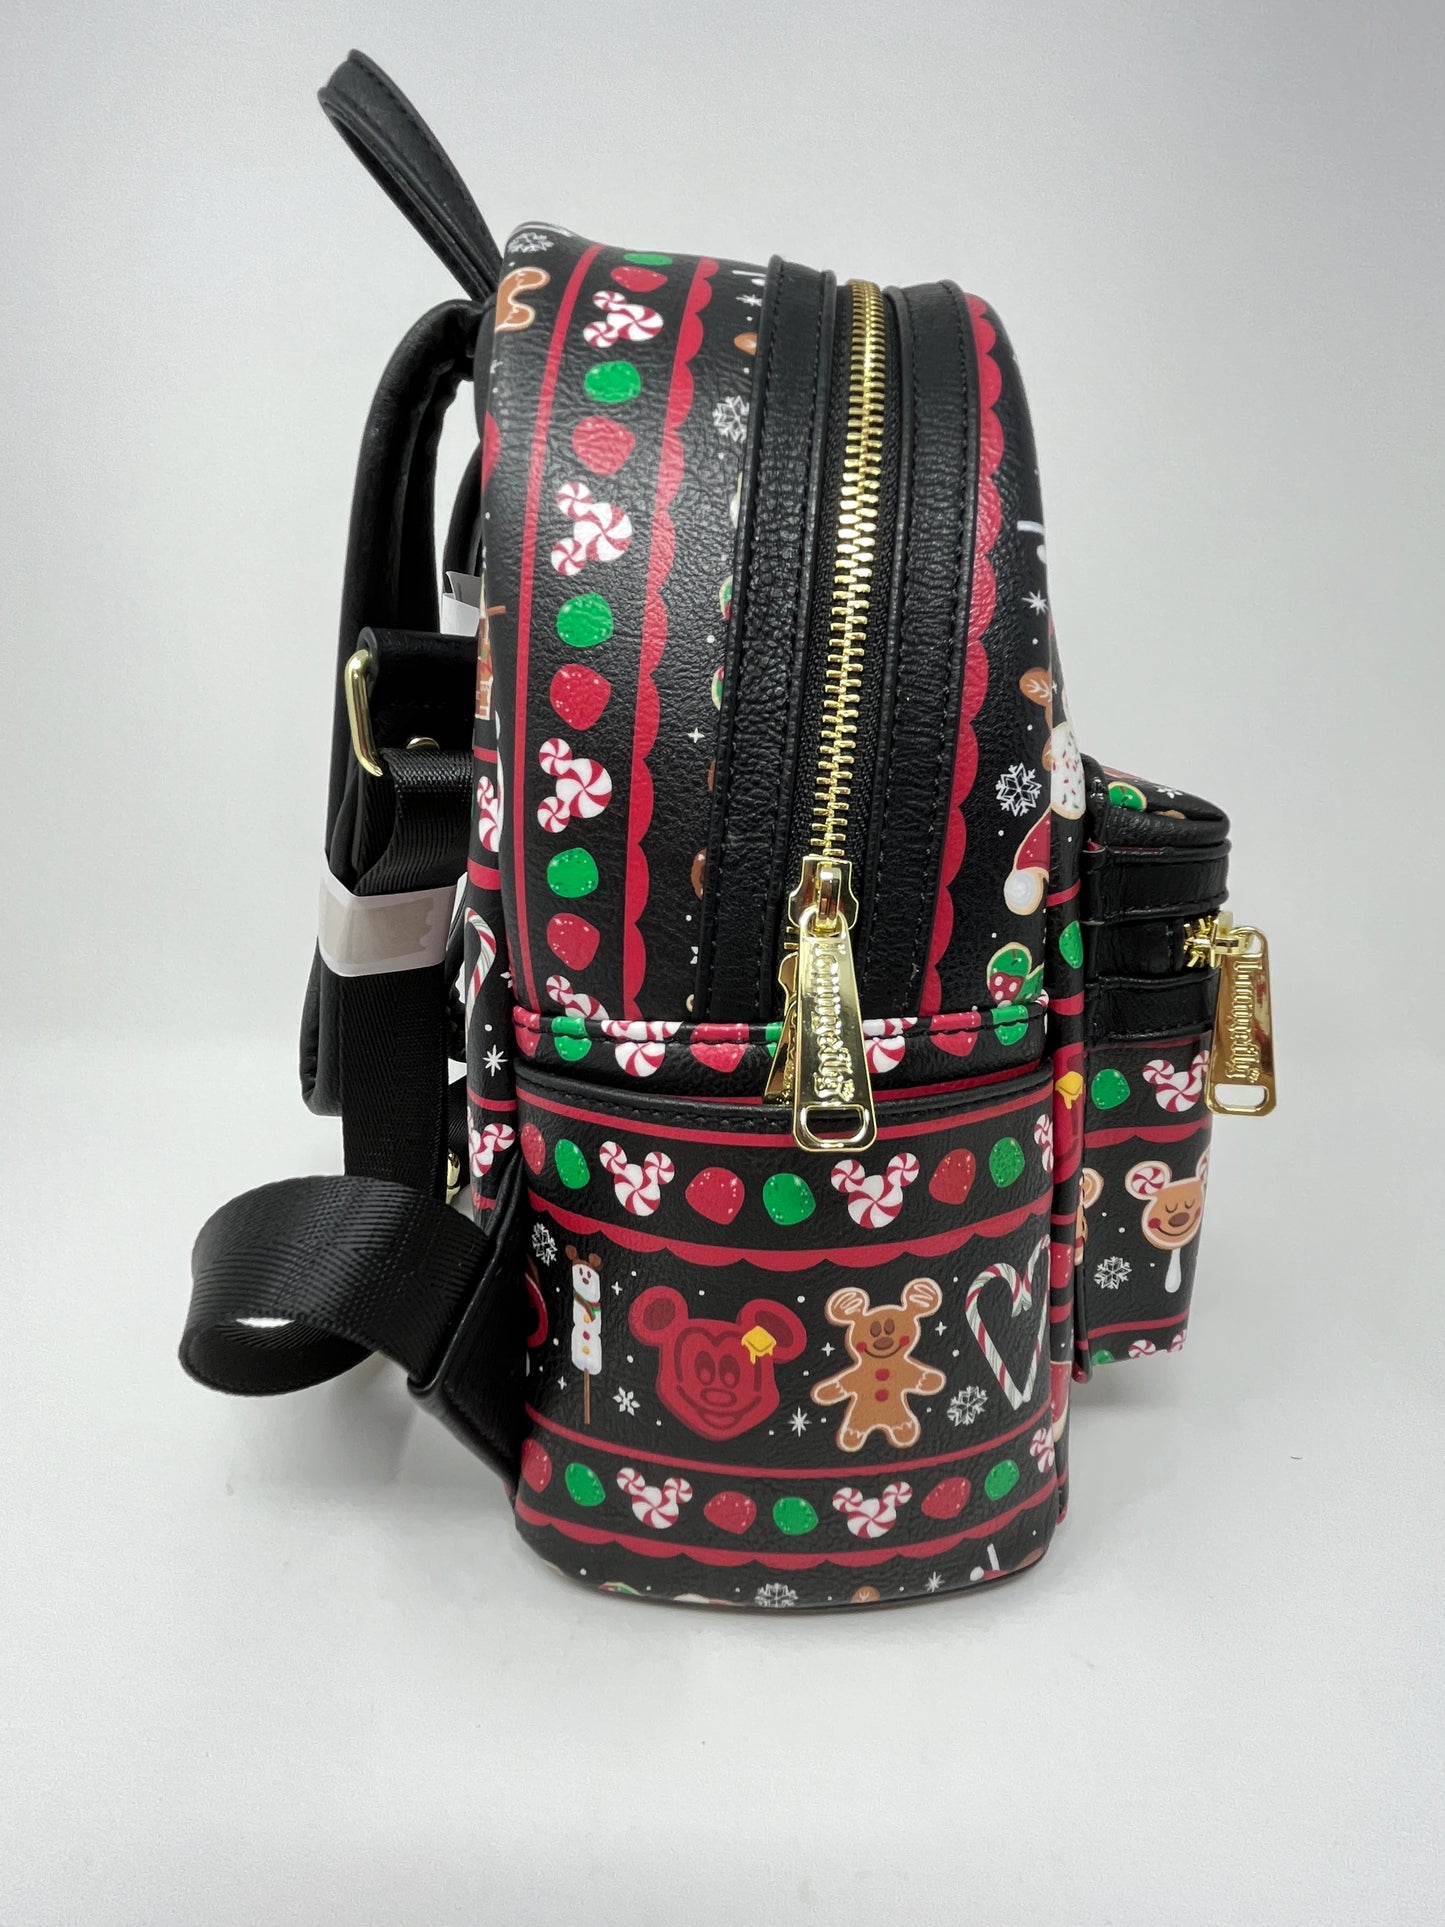 2019 CHRISTMAS SNACKS LOUNGEFLY MINI BACKPACK DISNEY PARK EXCLUSIVE